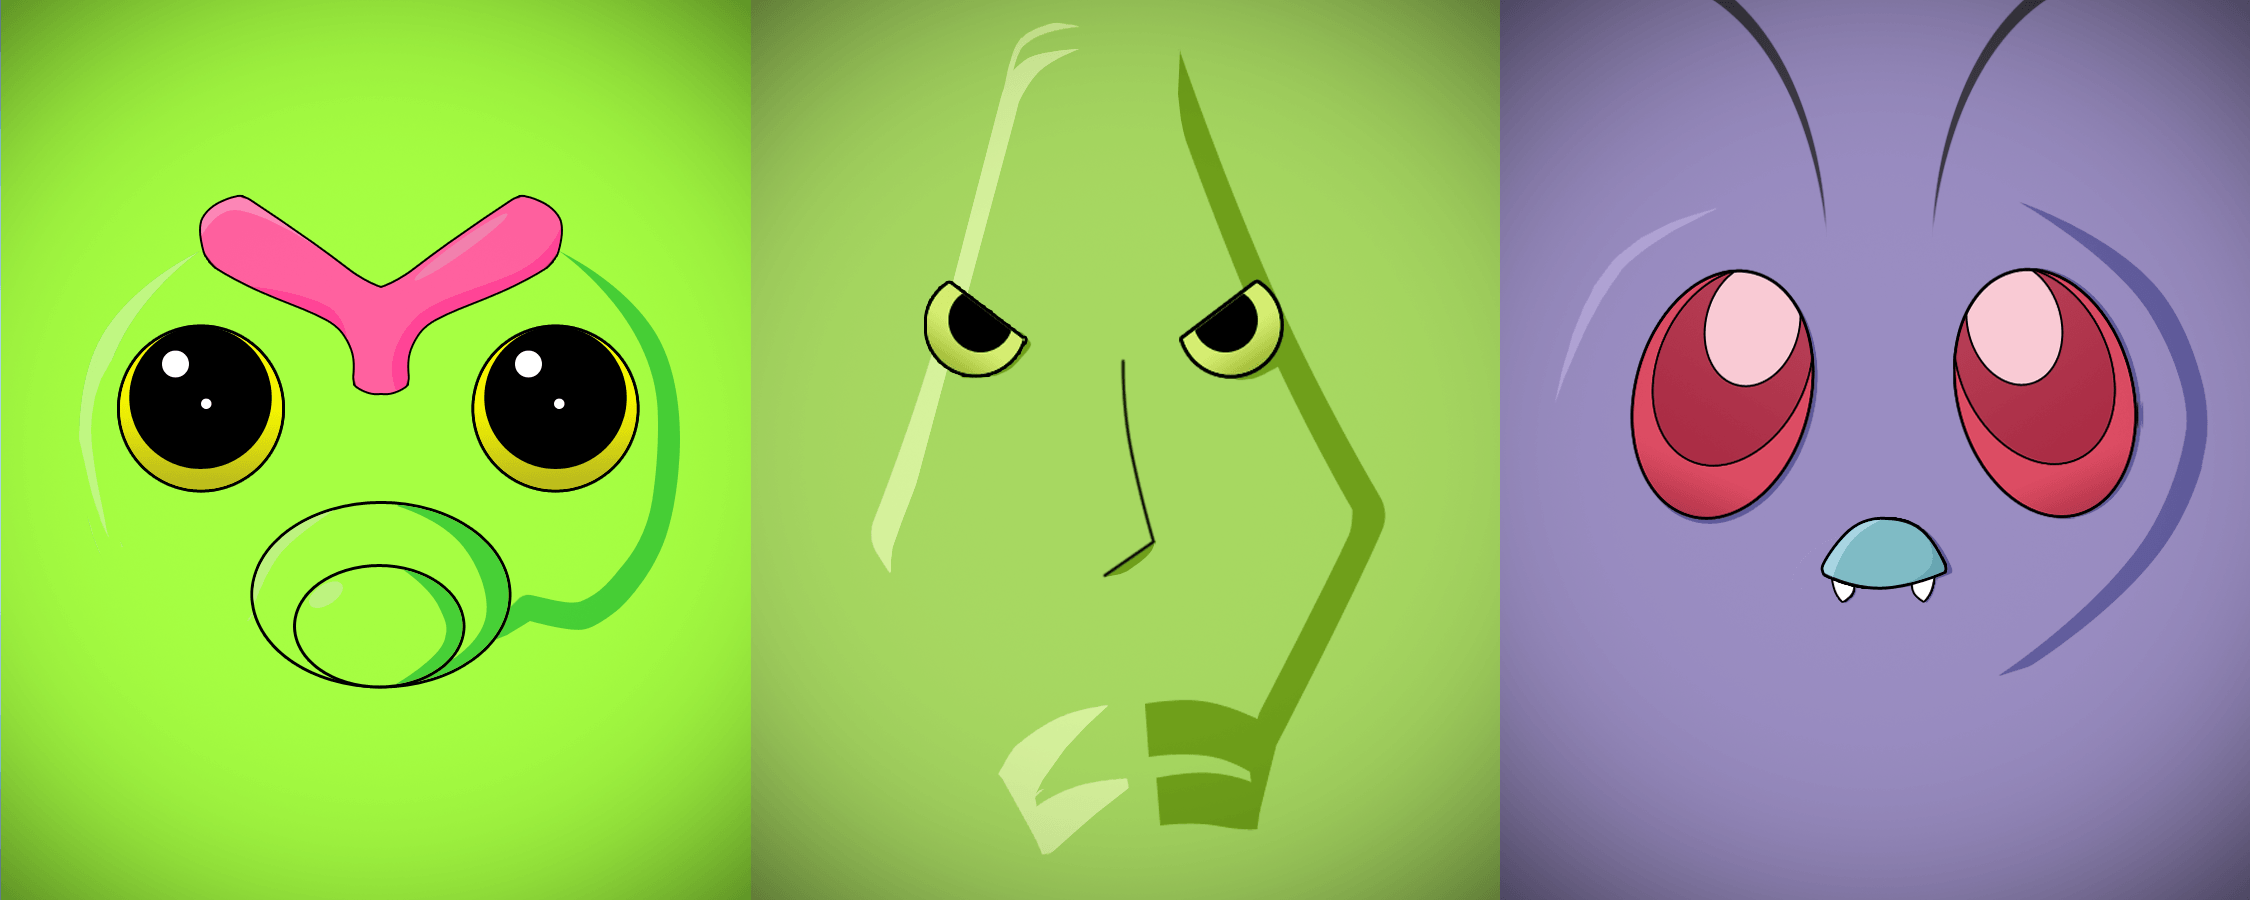 Minimalist Caterpie, Metapod and Butterfree by Vault-Girl